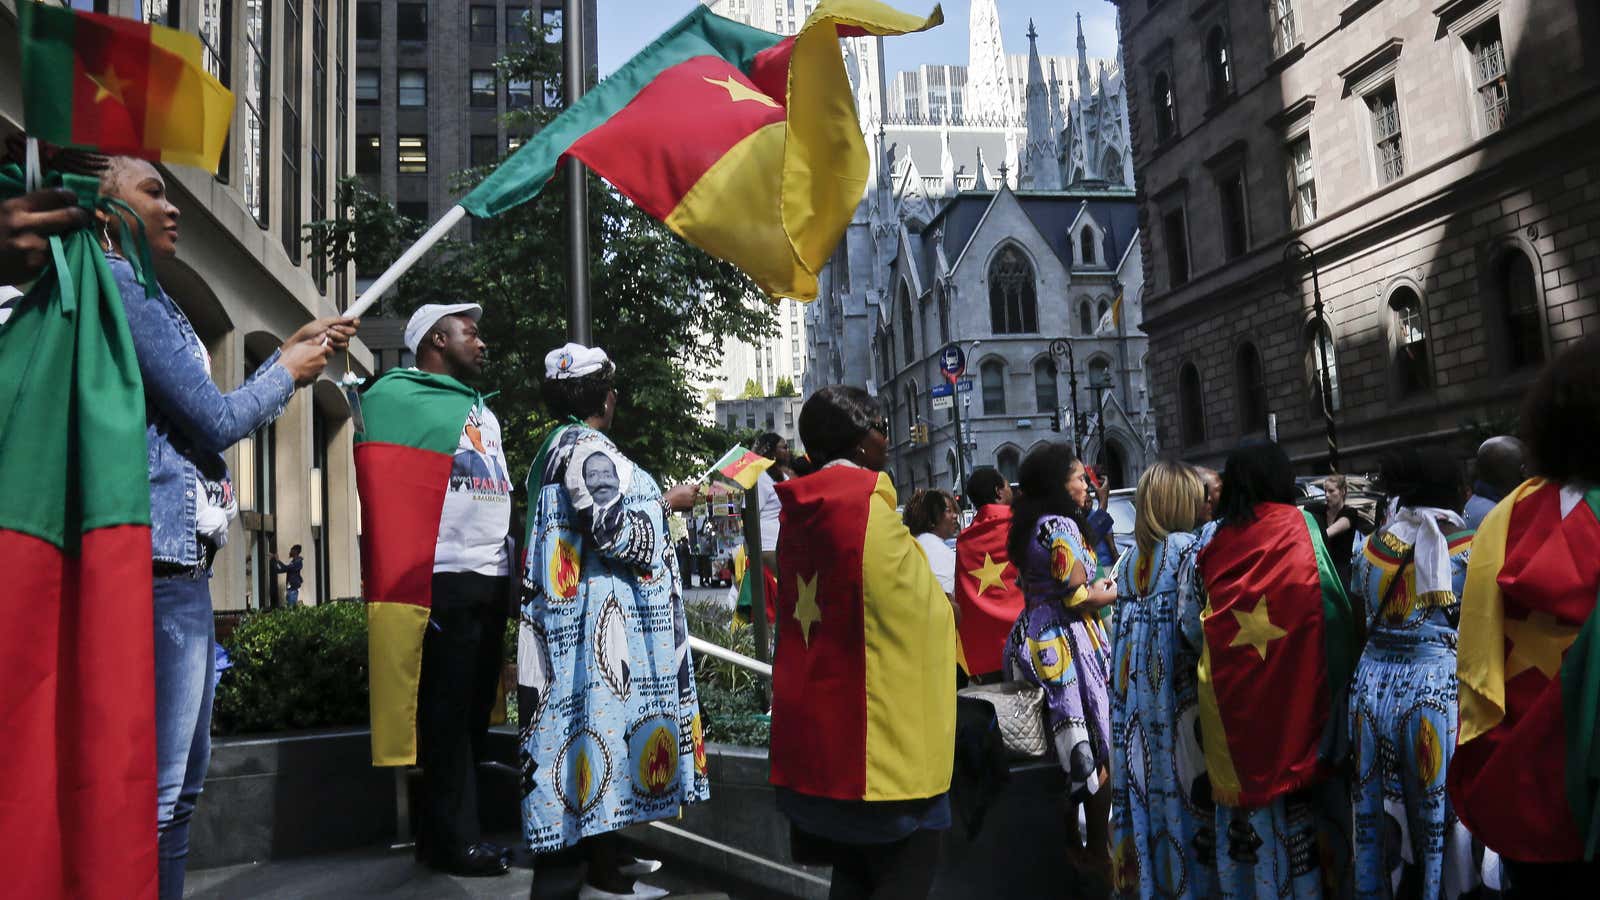 Cameroon supporters of president Biya in New York